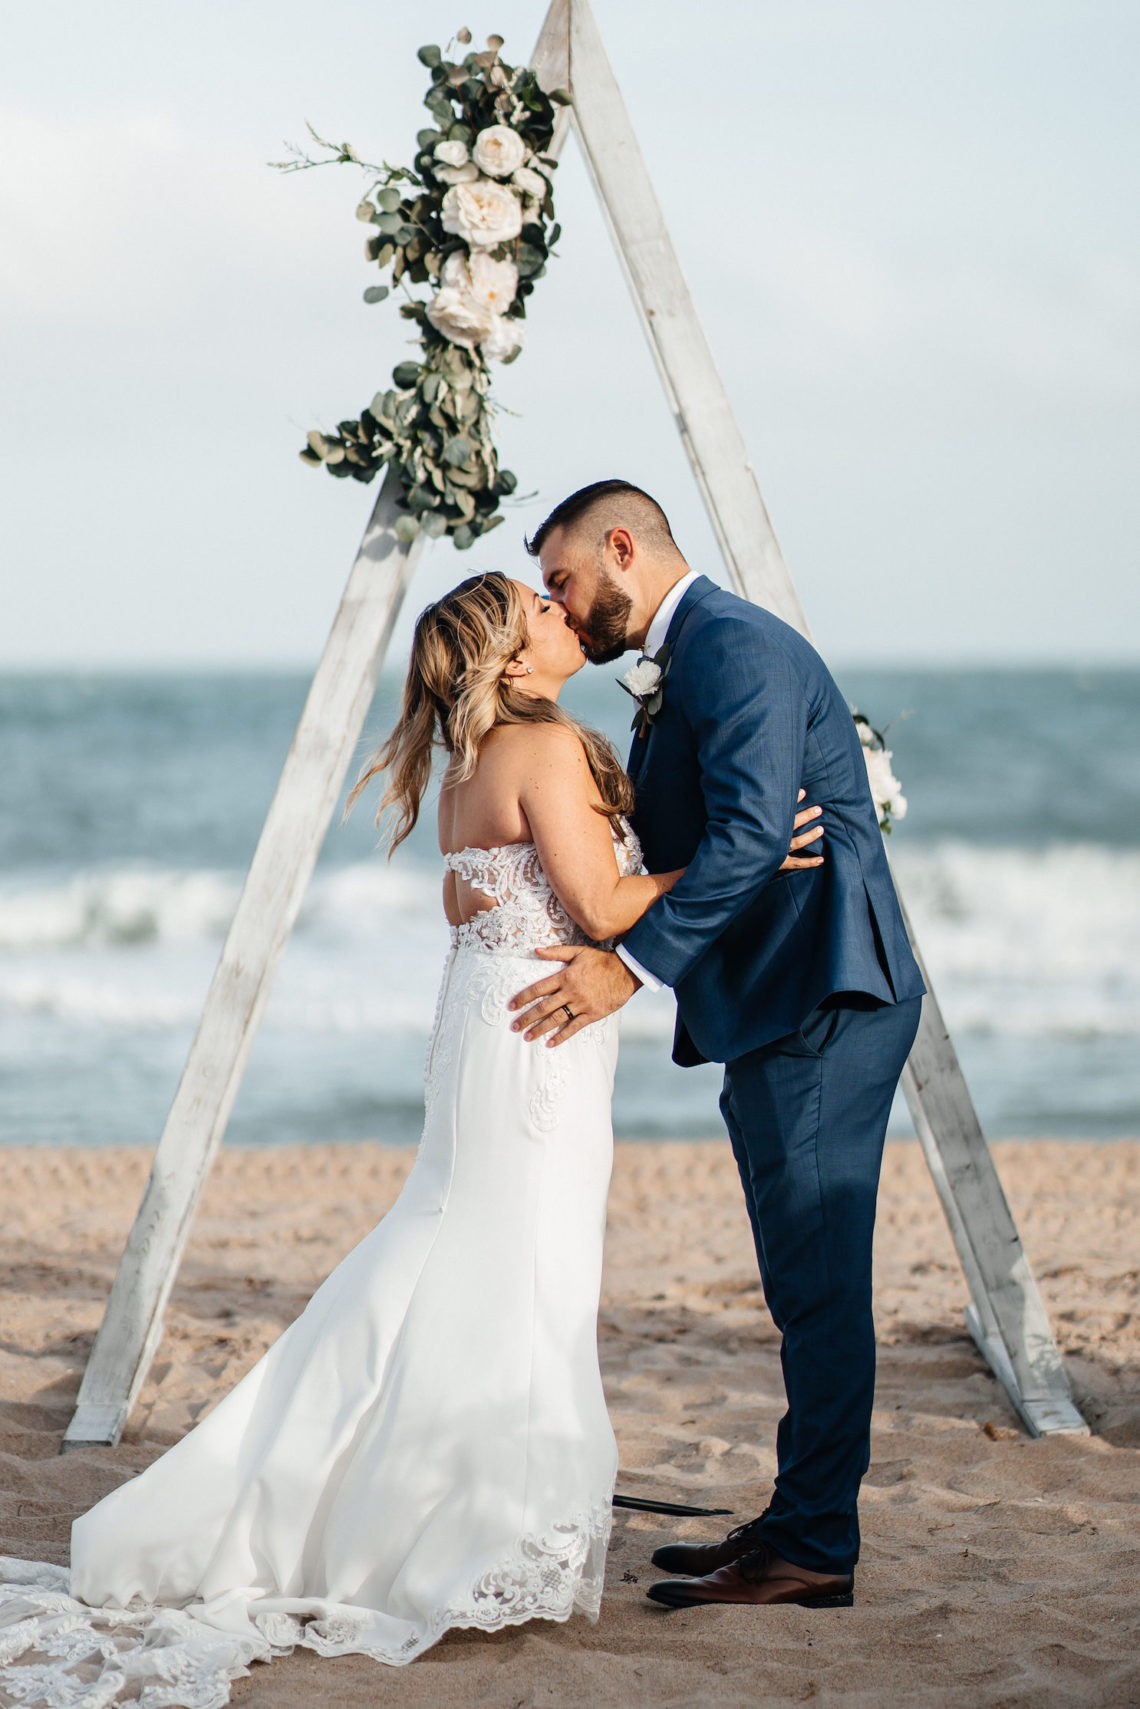 Bride and groom kiss in front of triangle arbor - Lauderdale-by-the-Sea